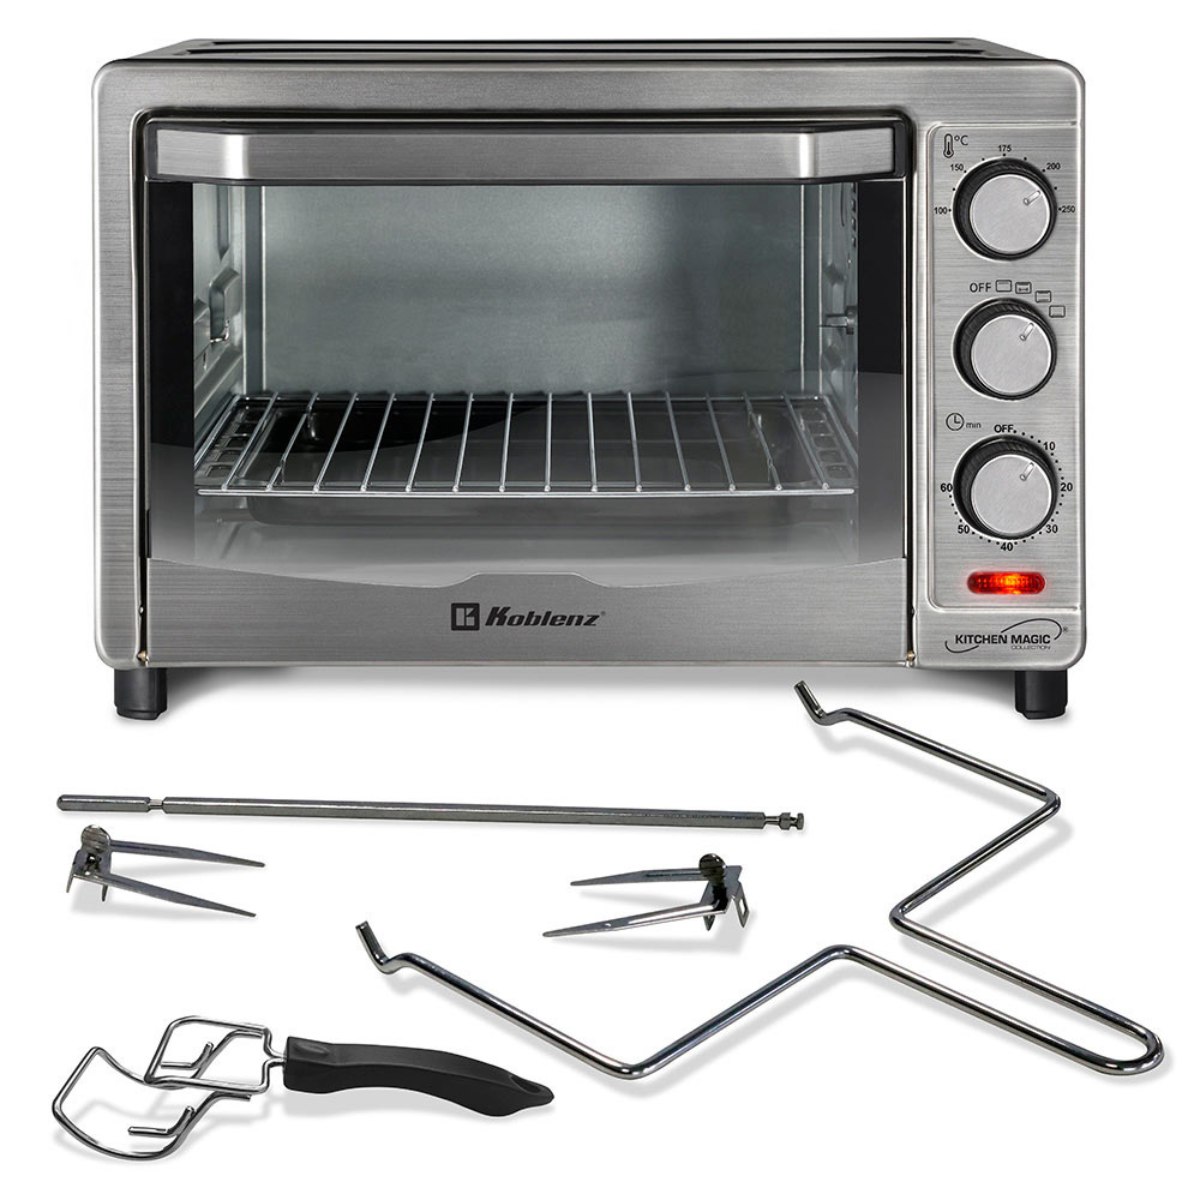 Toaster Oven with Rotisserie HKM-1500 R